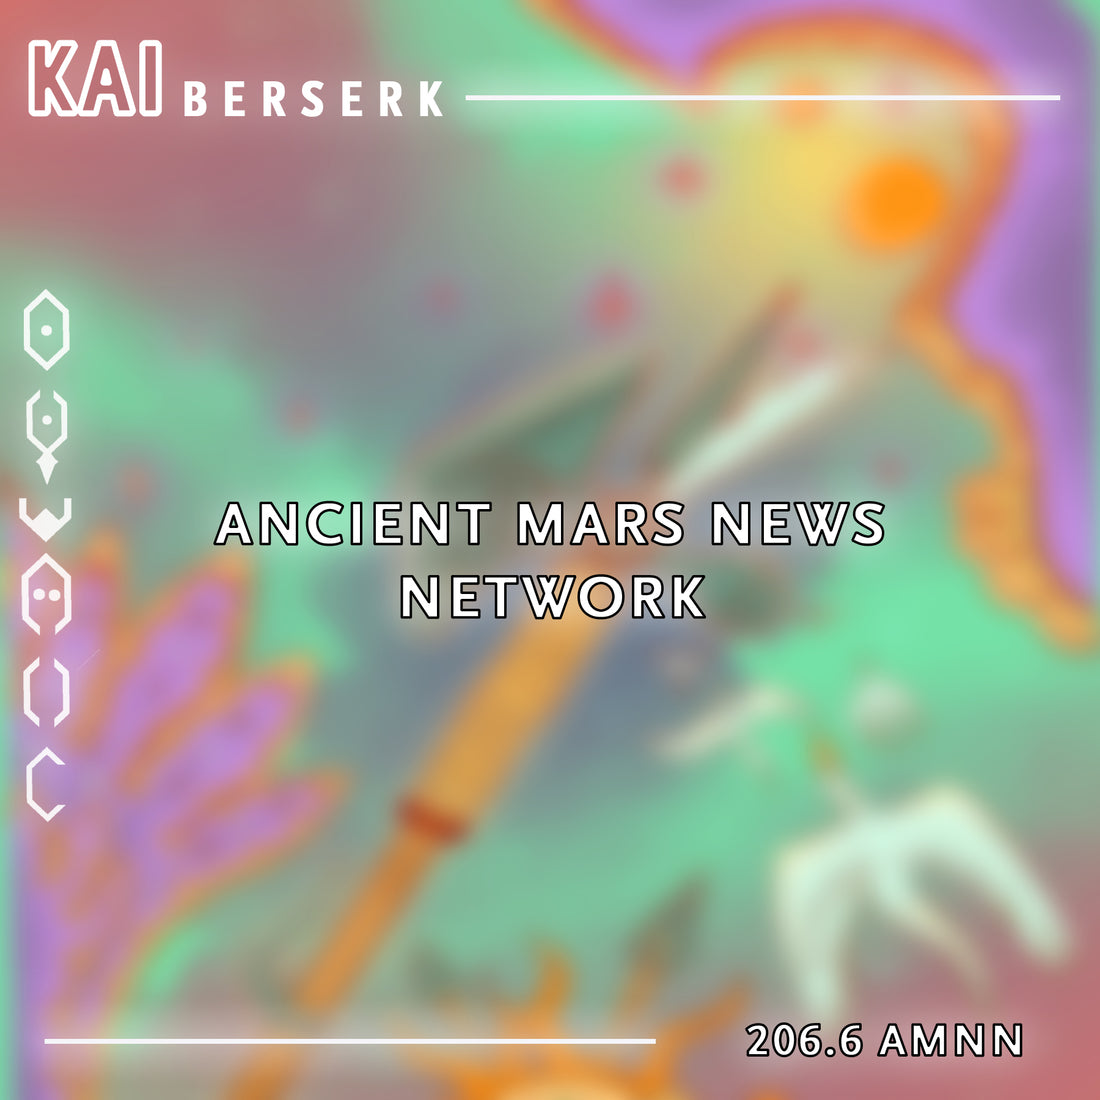 Introducing the Ancient Mars News Network!